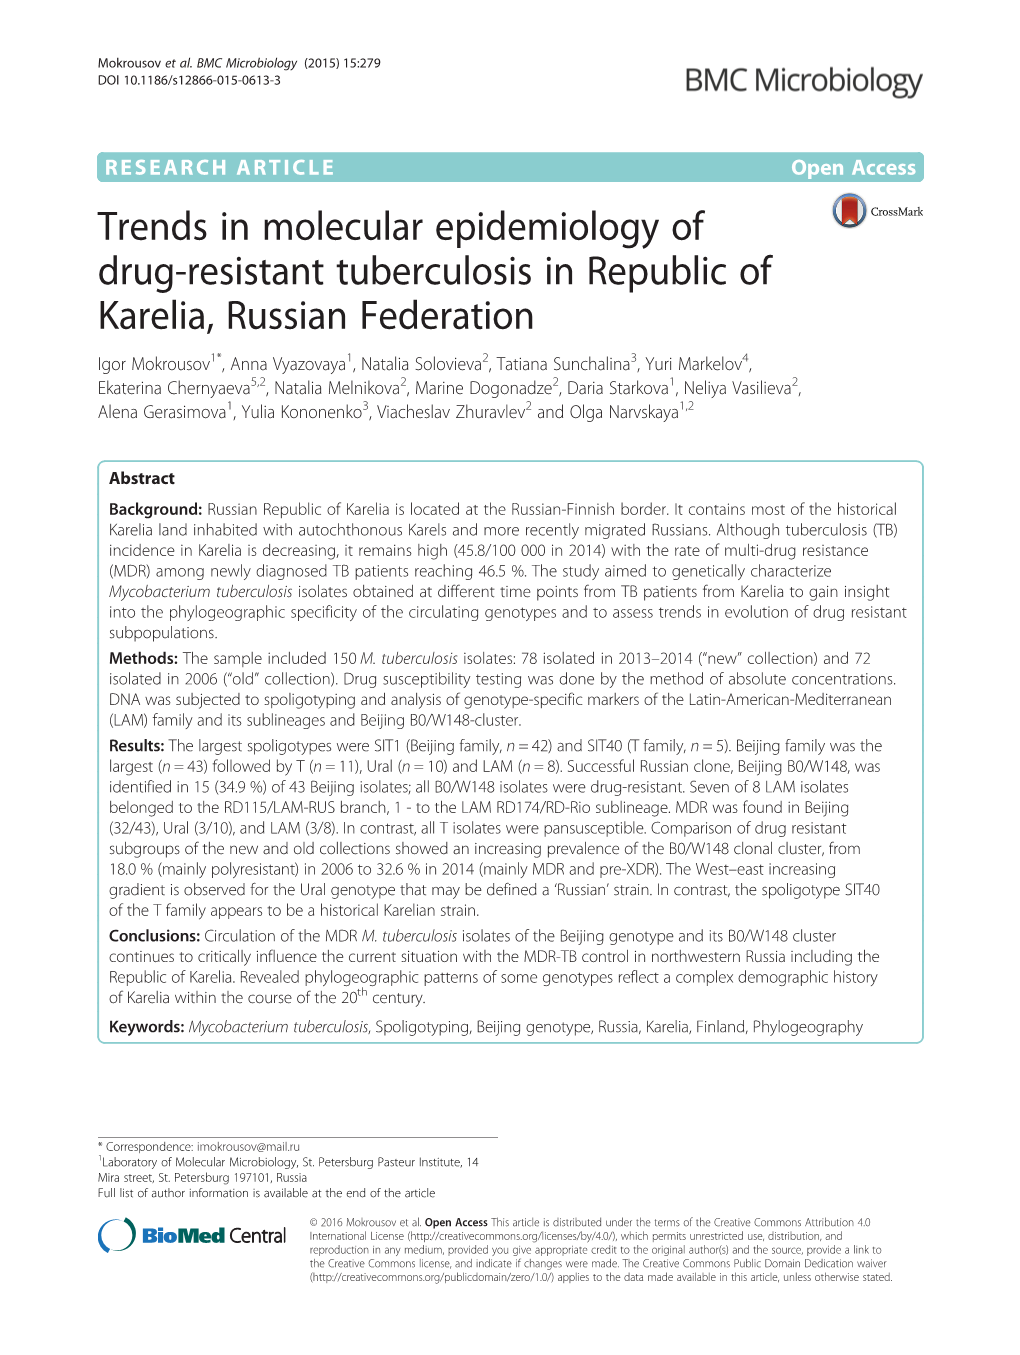 Trends in Molecular Epidemiology of Drug-Resistant Tuberculosis In